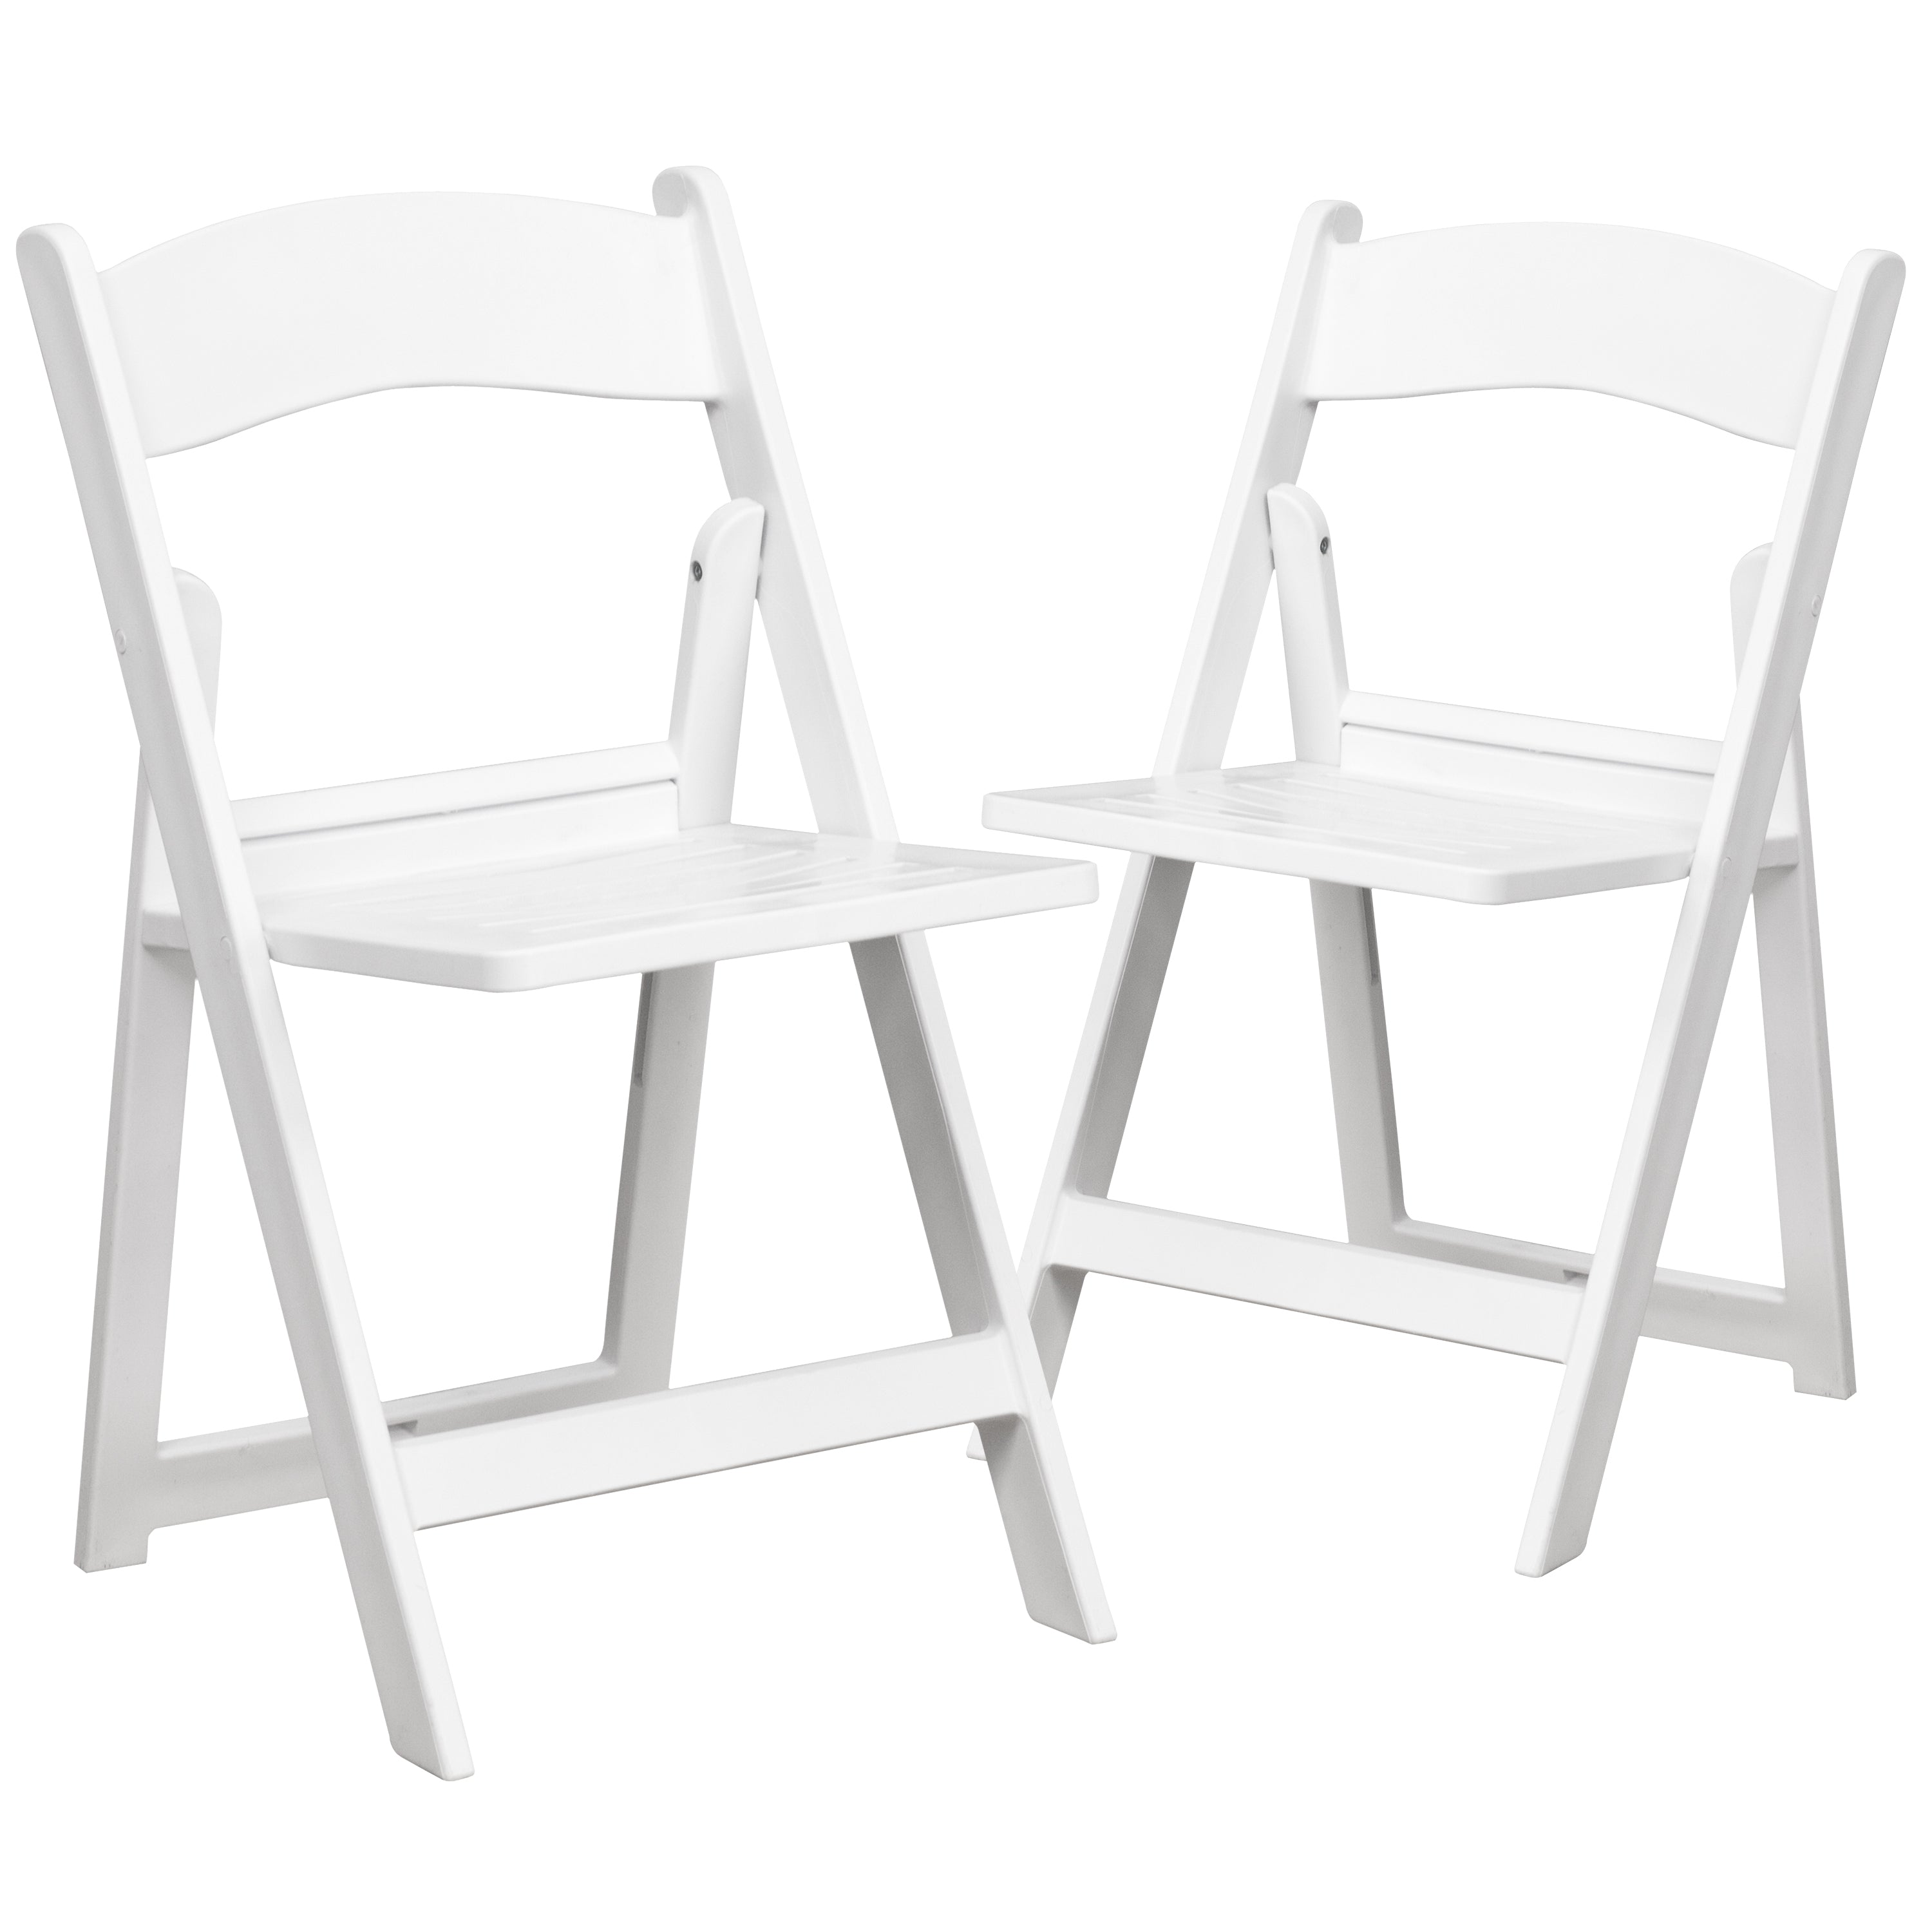 2 Pack HERCULES Series 800 lb. Capacity Resin Folding Chair with Slatted Seat-Resin Folding Chair-Flash Furniture-Wall2Wall Furnishings